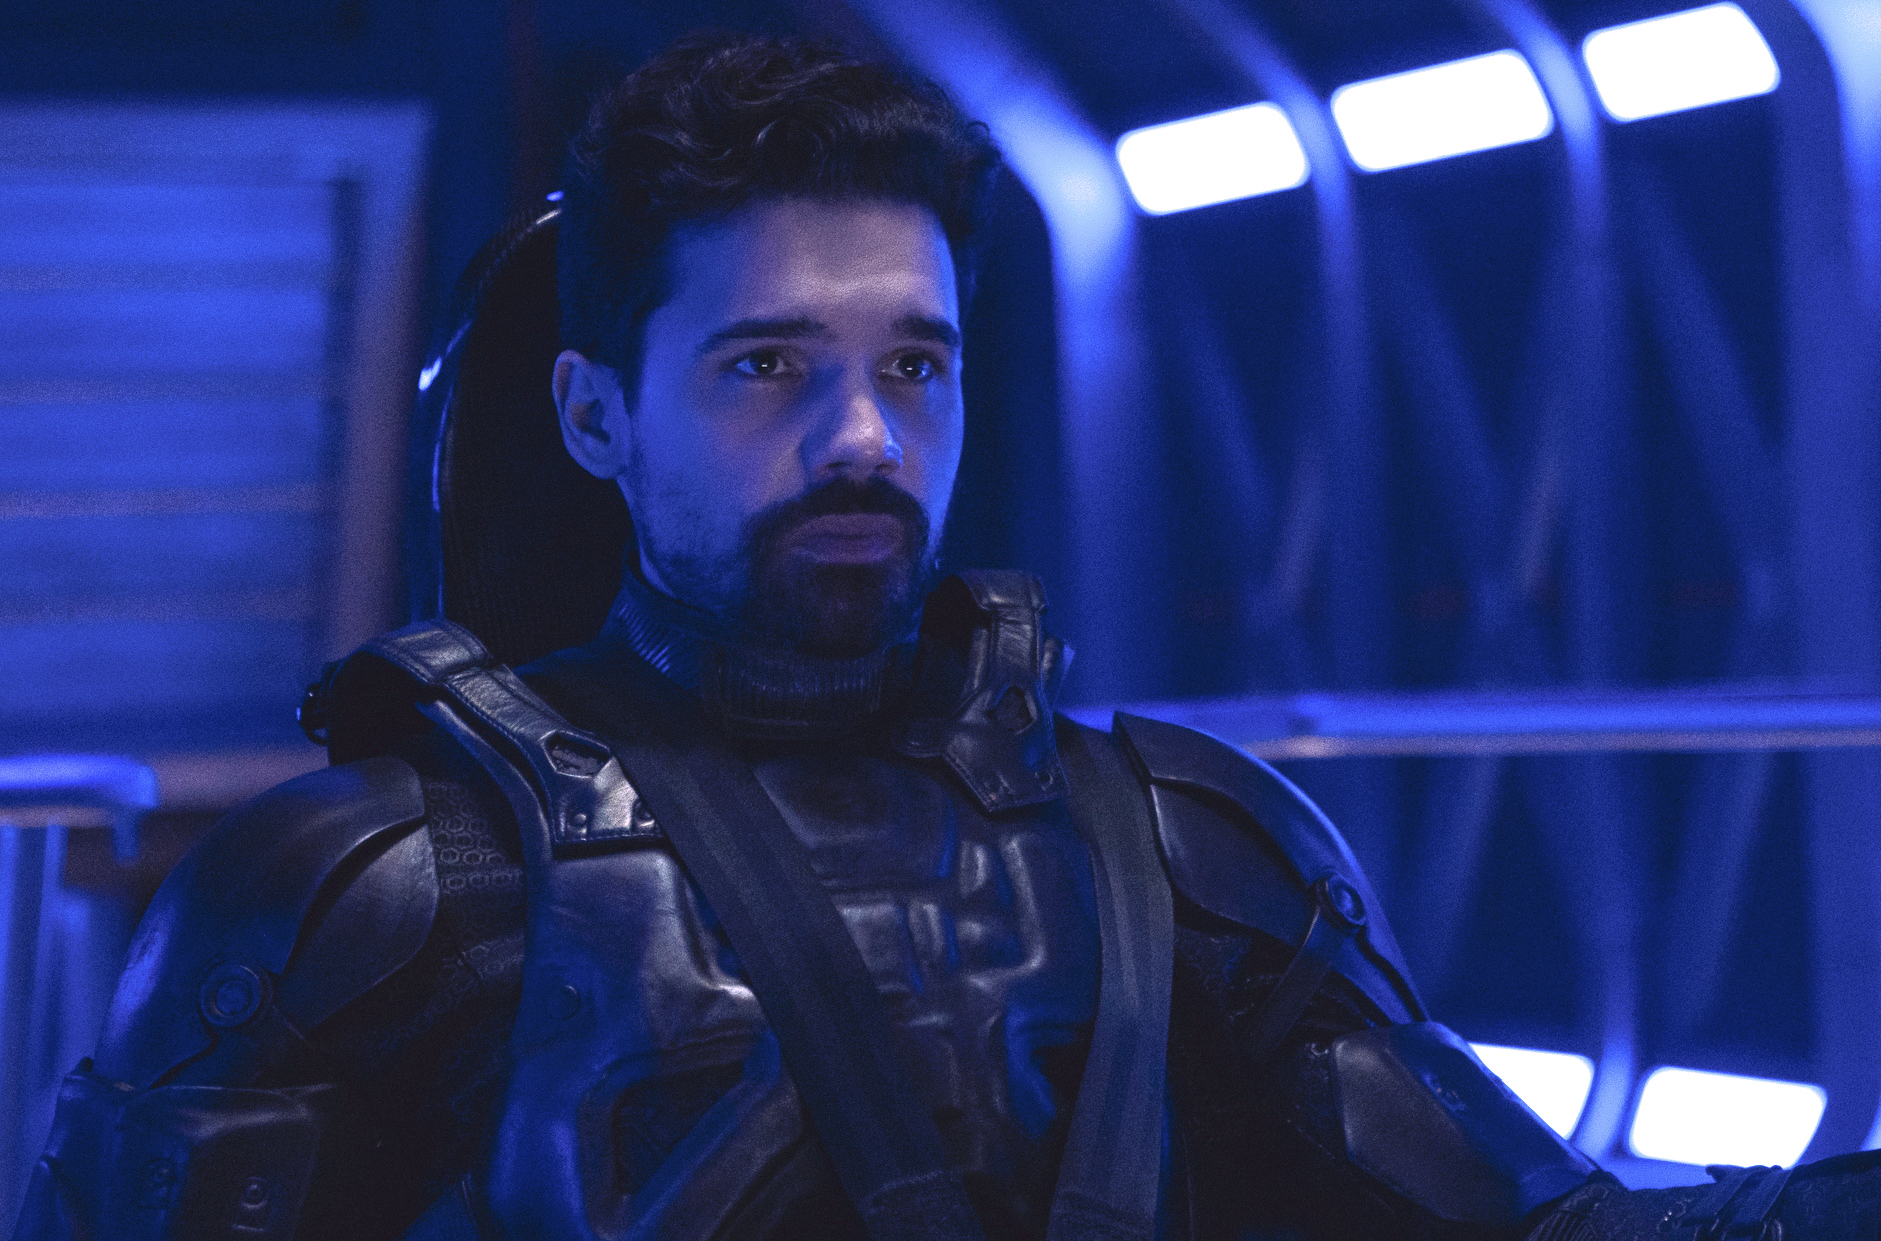 Holden sits in a spaceship chair (lol) in The Expanse season 6